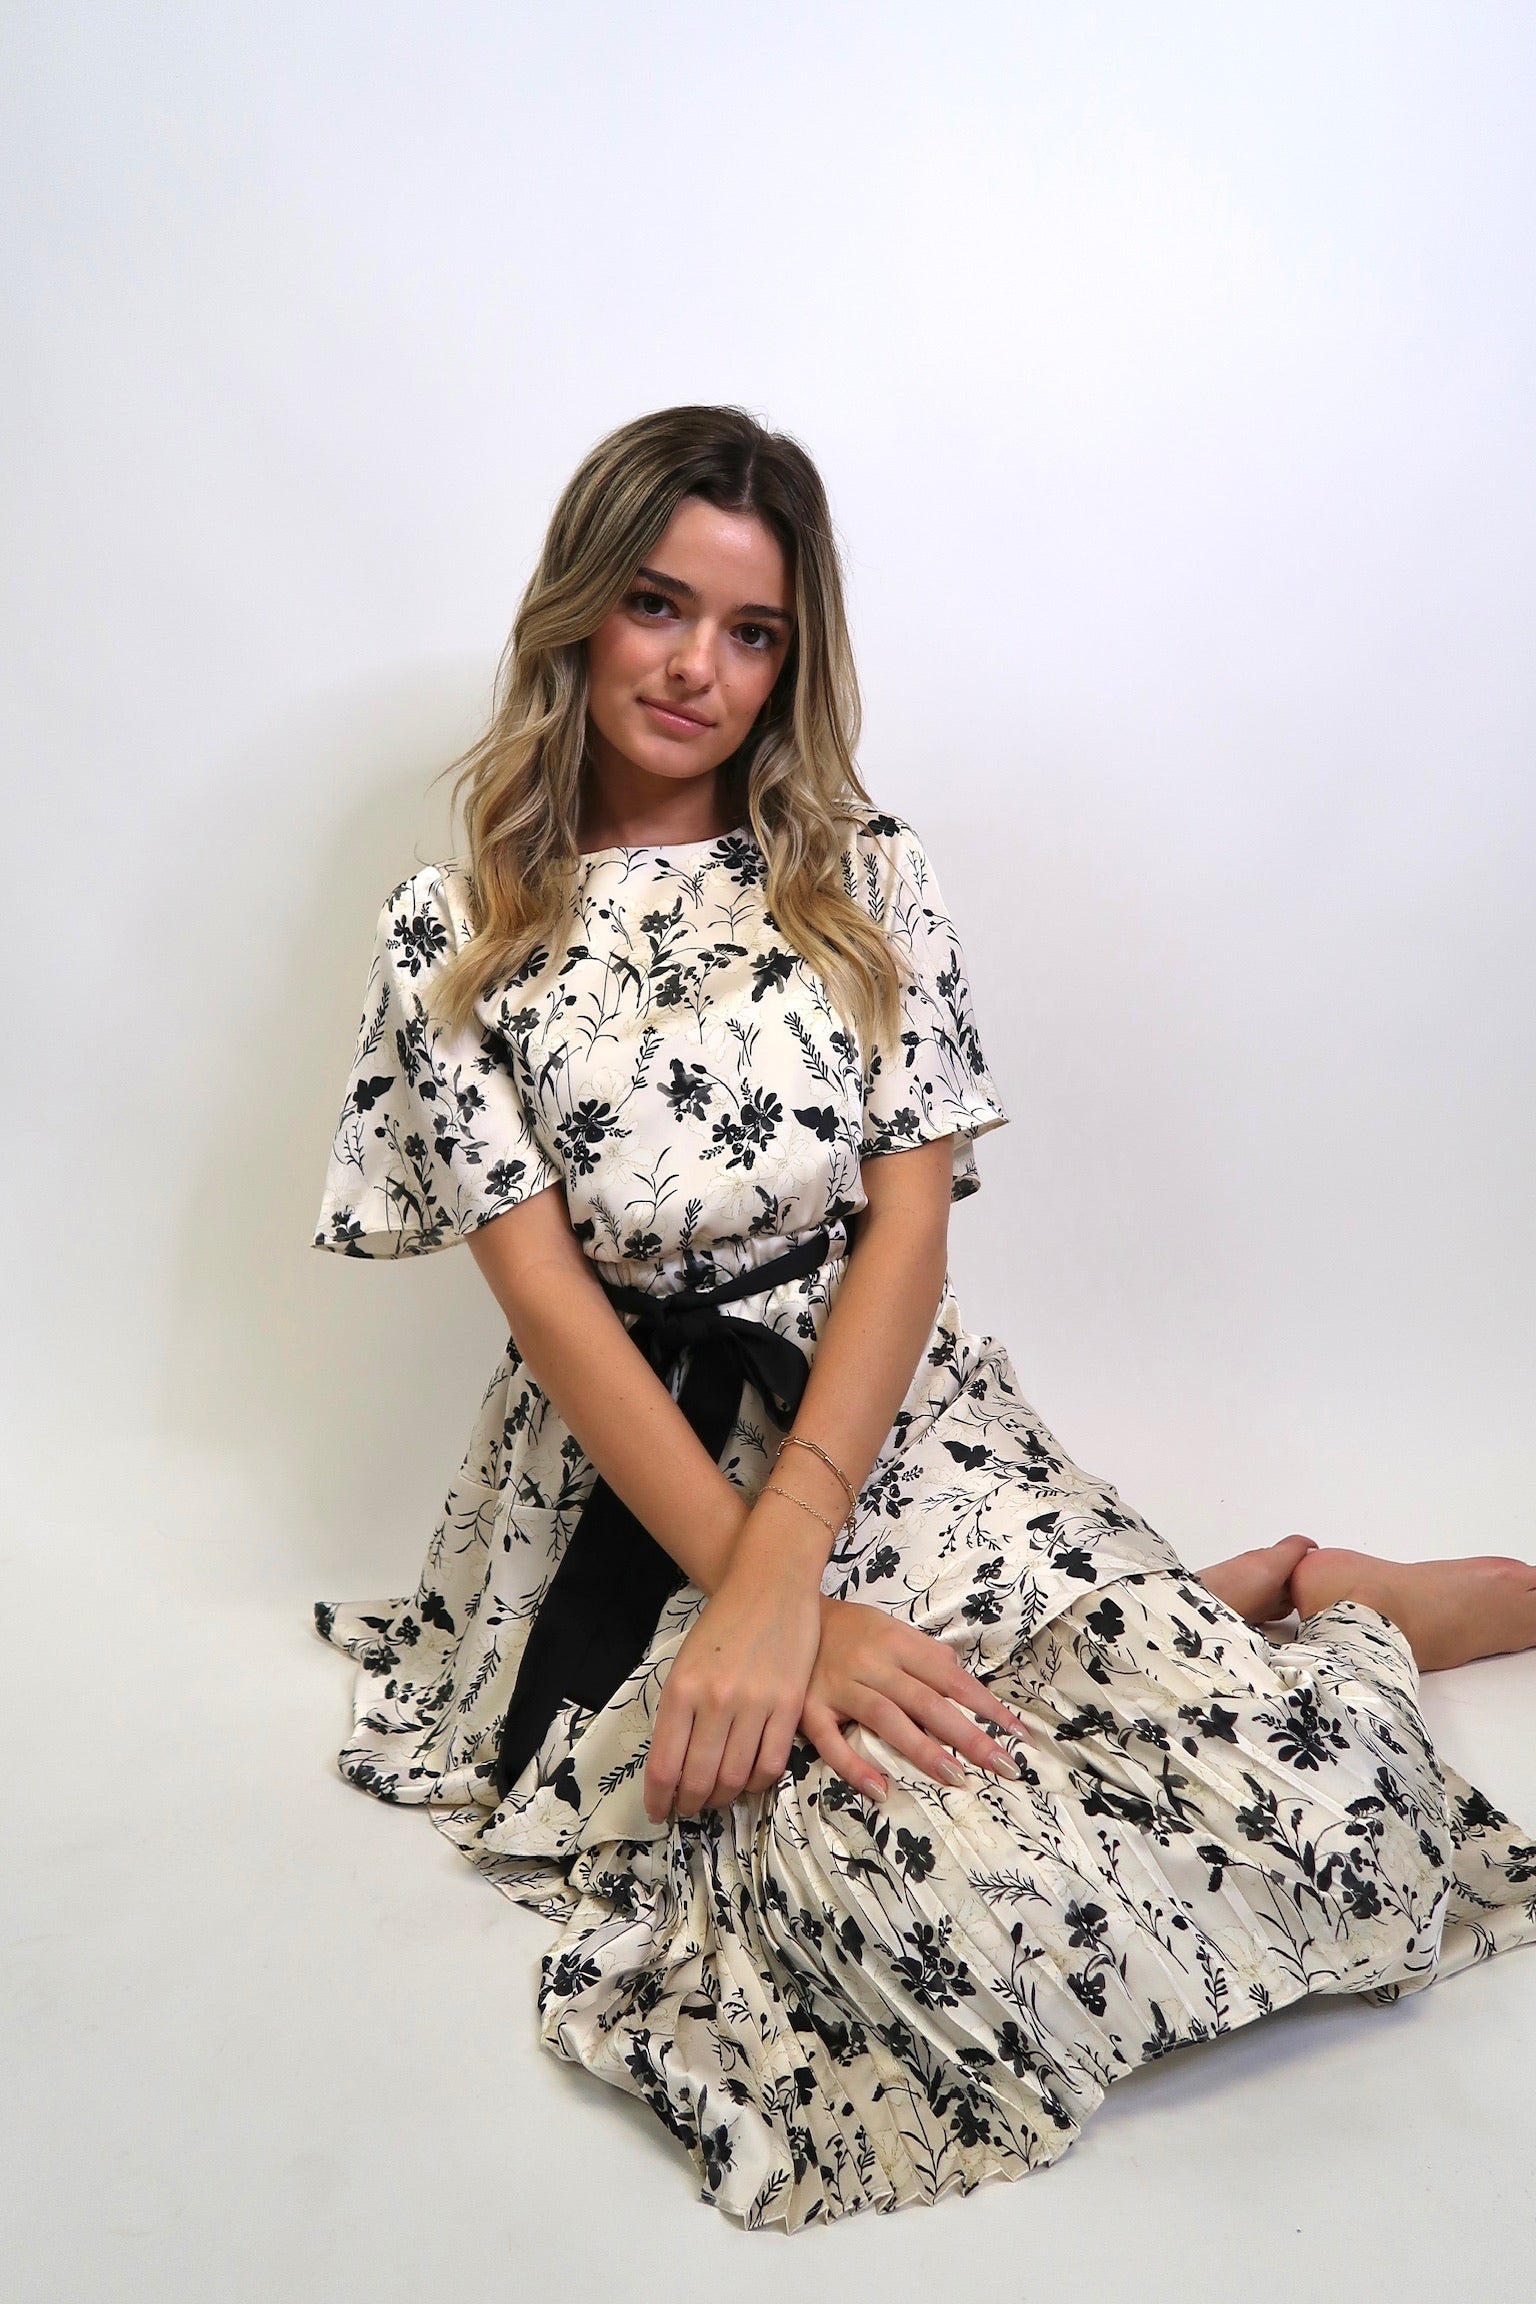 THE ALICE TIERED MAXI DRESS